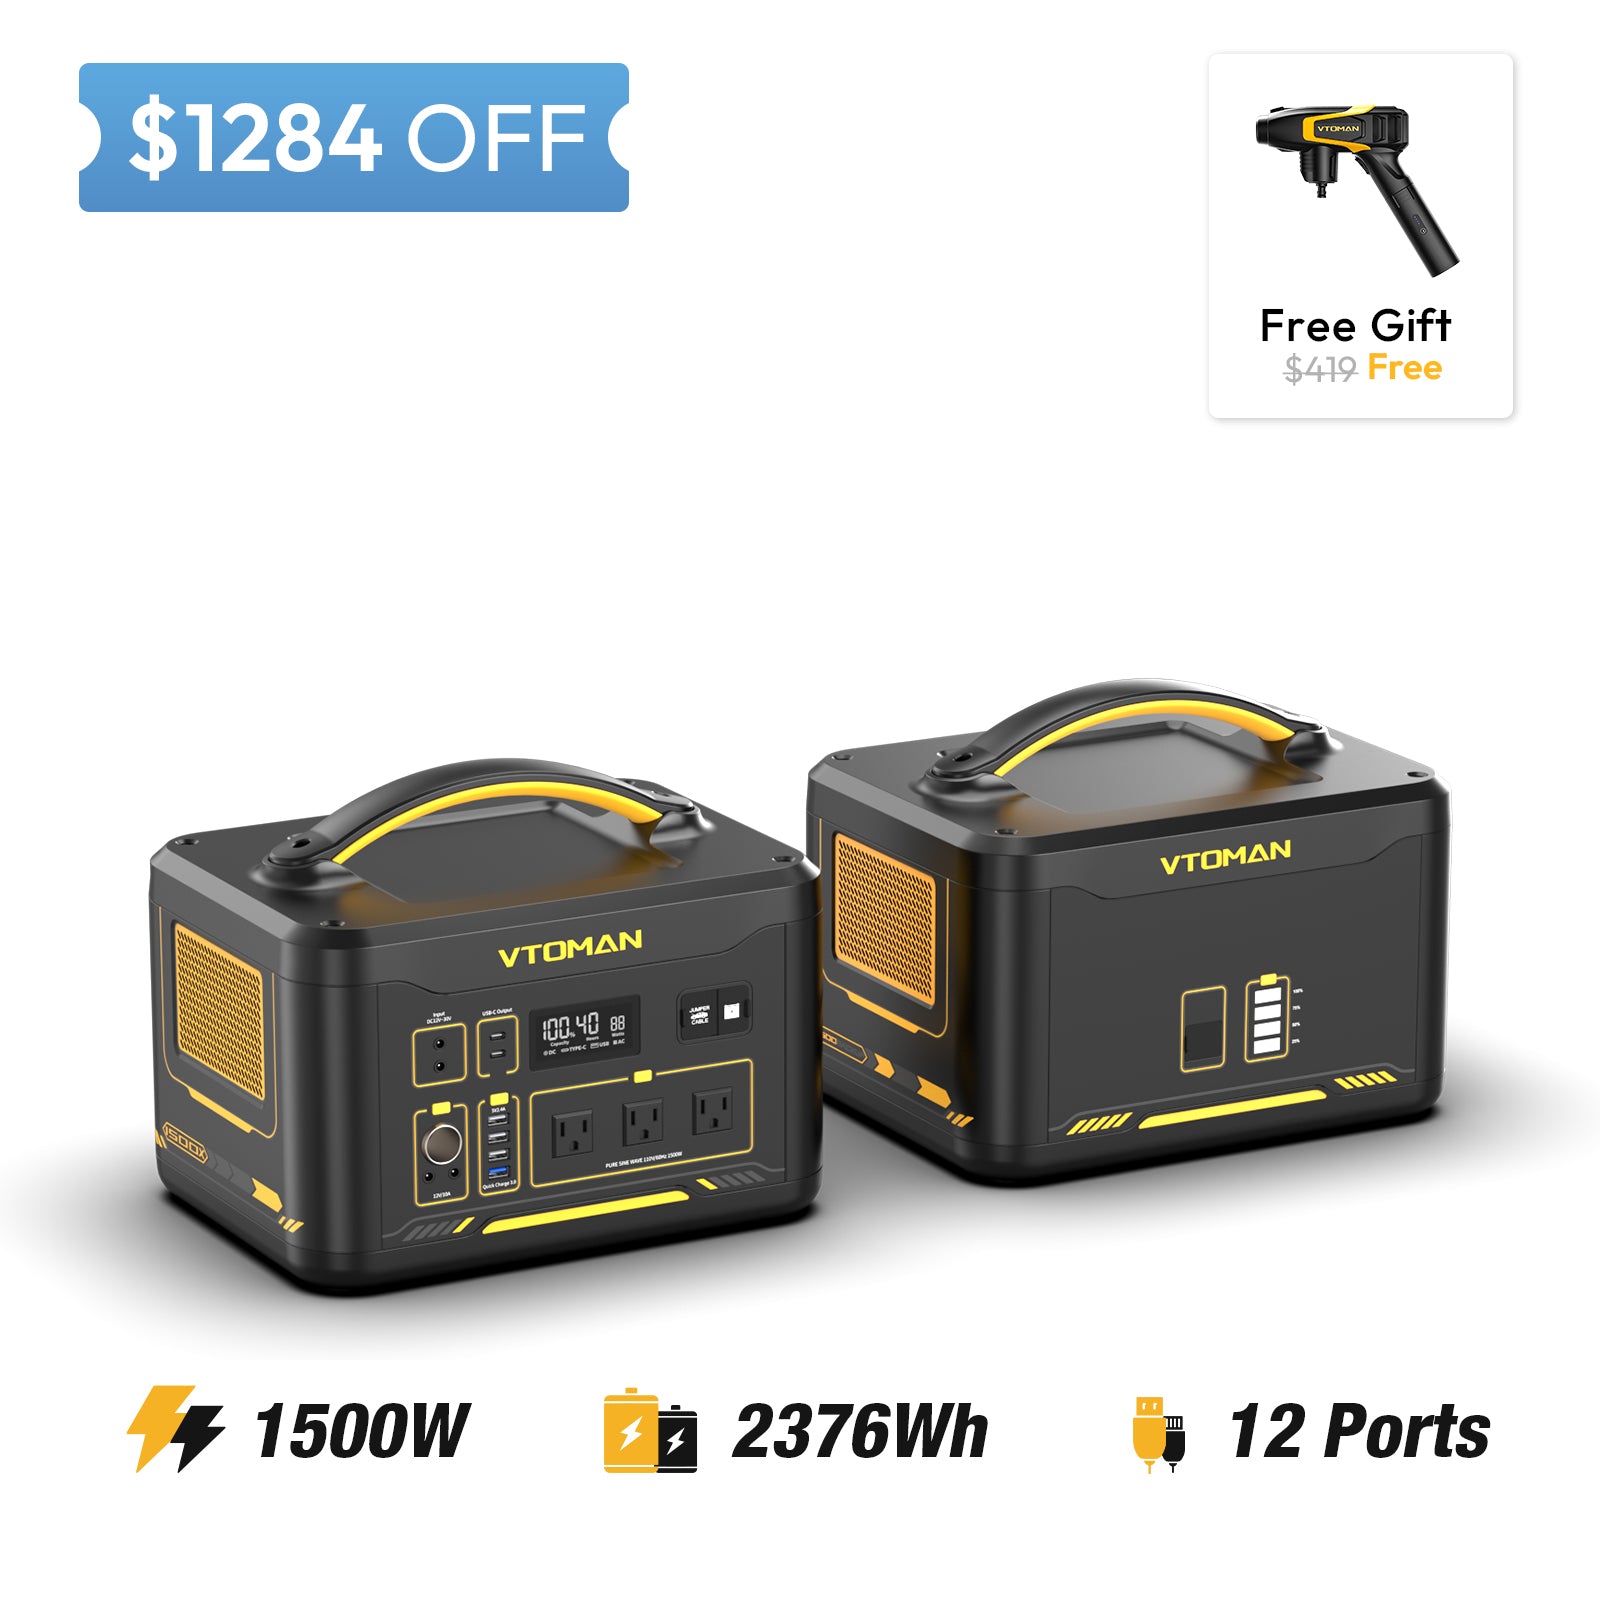 jump 1500X and 1548wh extra battery save $1284 in summer sale